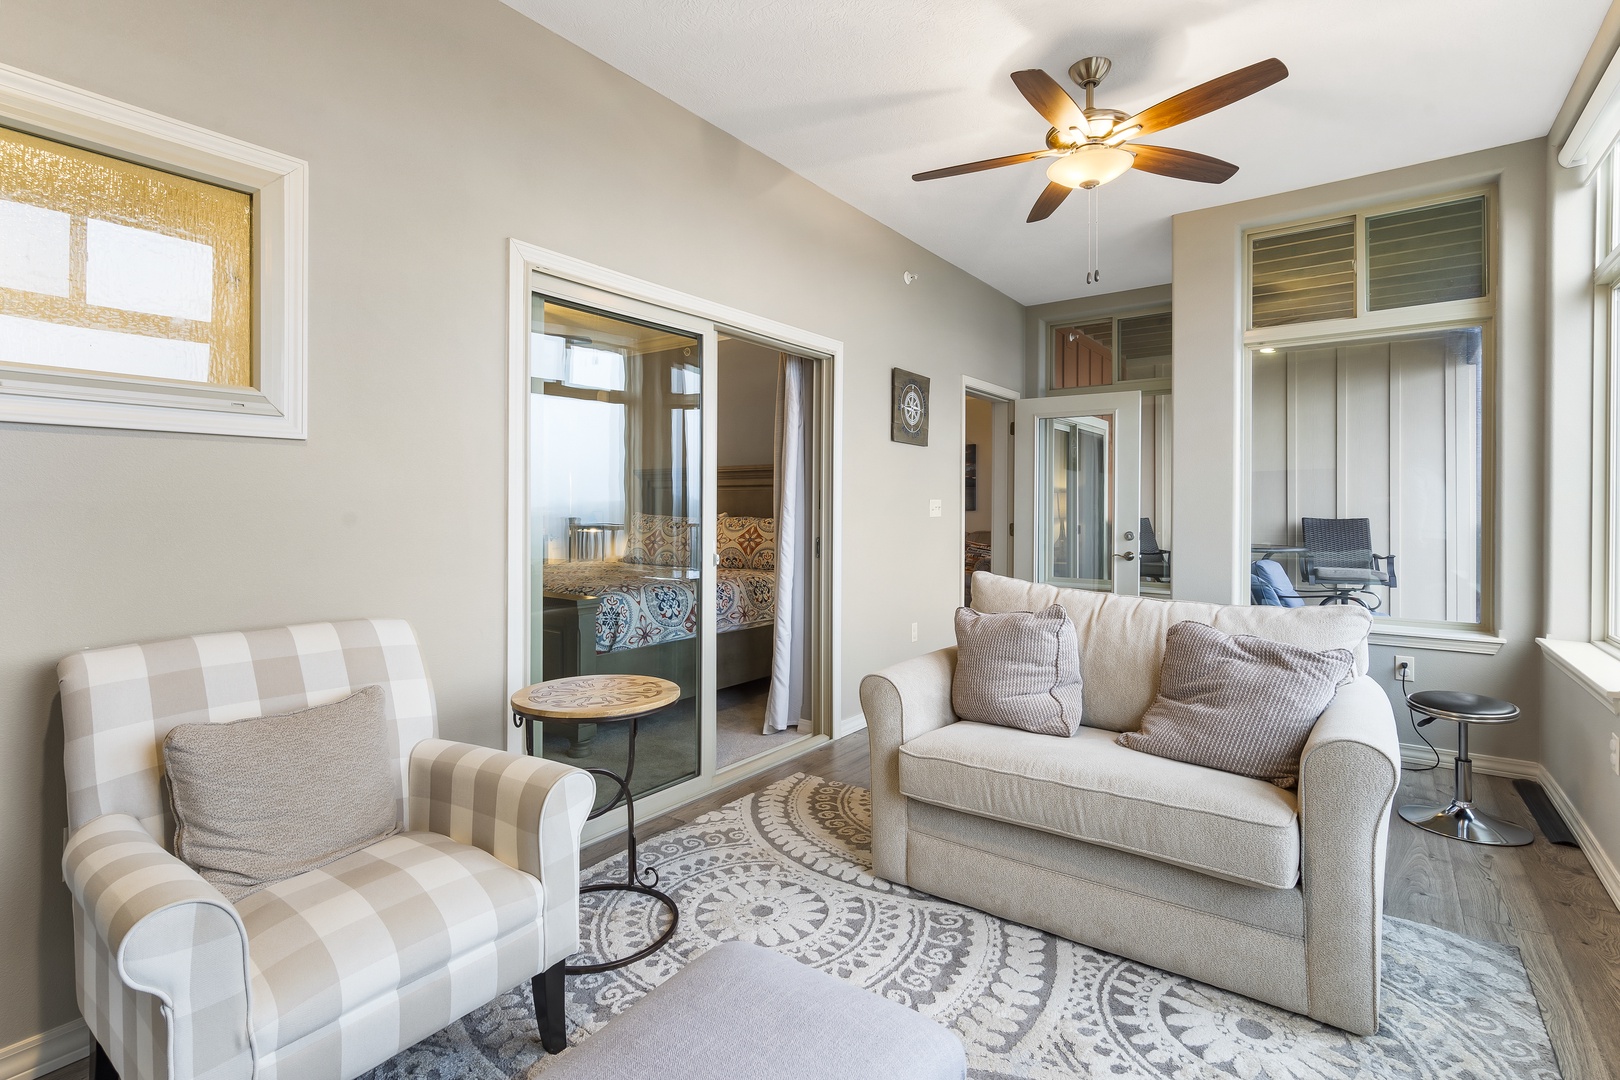 The sunroom offers a picturesque backdrop for enjoying movies & gaming